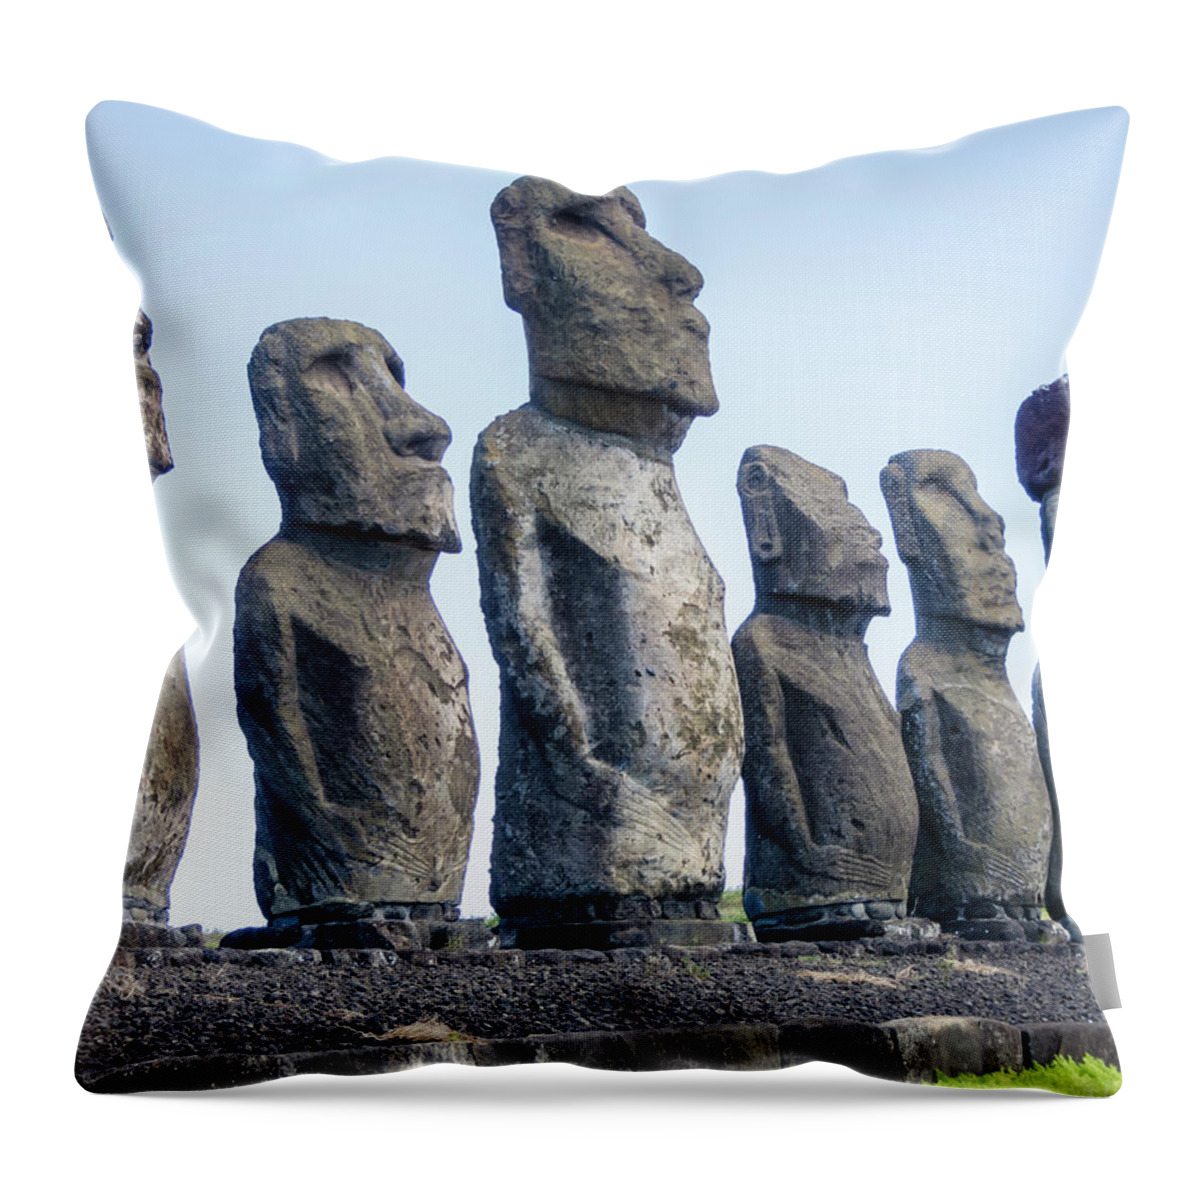 Statue Throw Pillow featuring the photograph Moai Statues At Ahu Tongariki, Easter #1 by David Madison